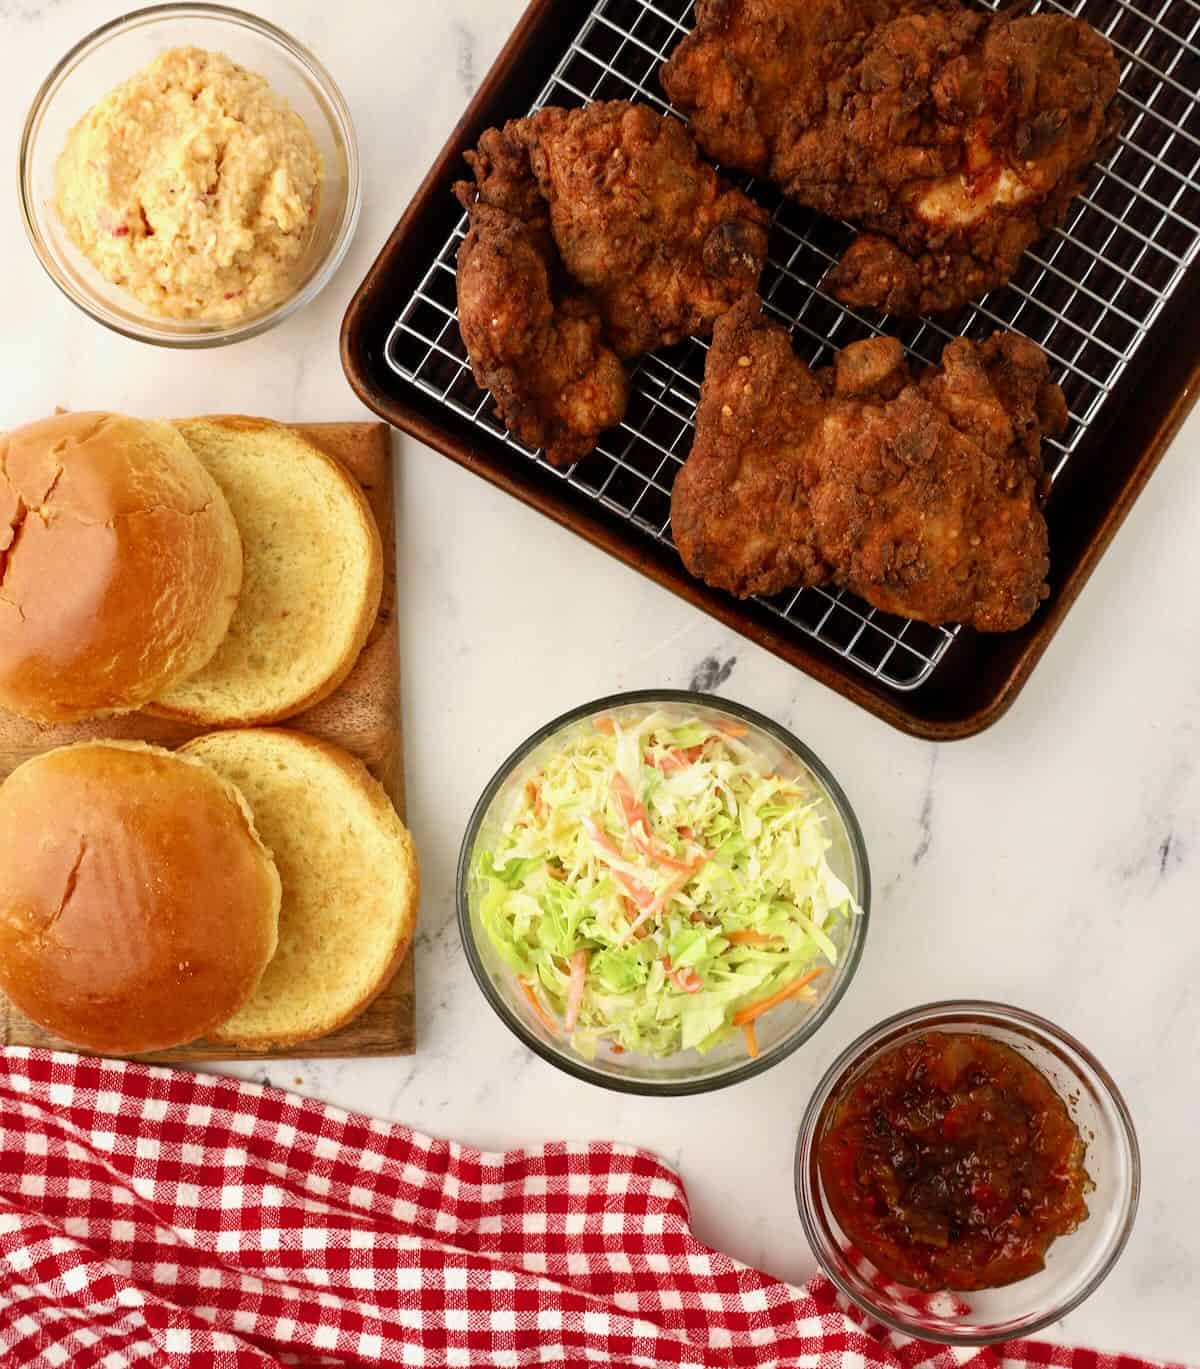 Toasted buns, fried chicken, coleslaw, pimento cheese and bacon chutney. 